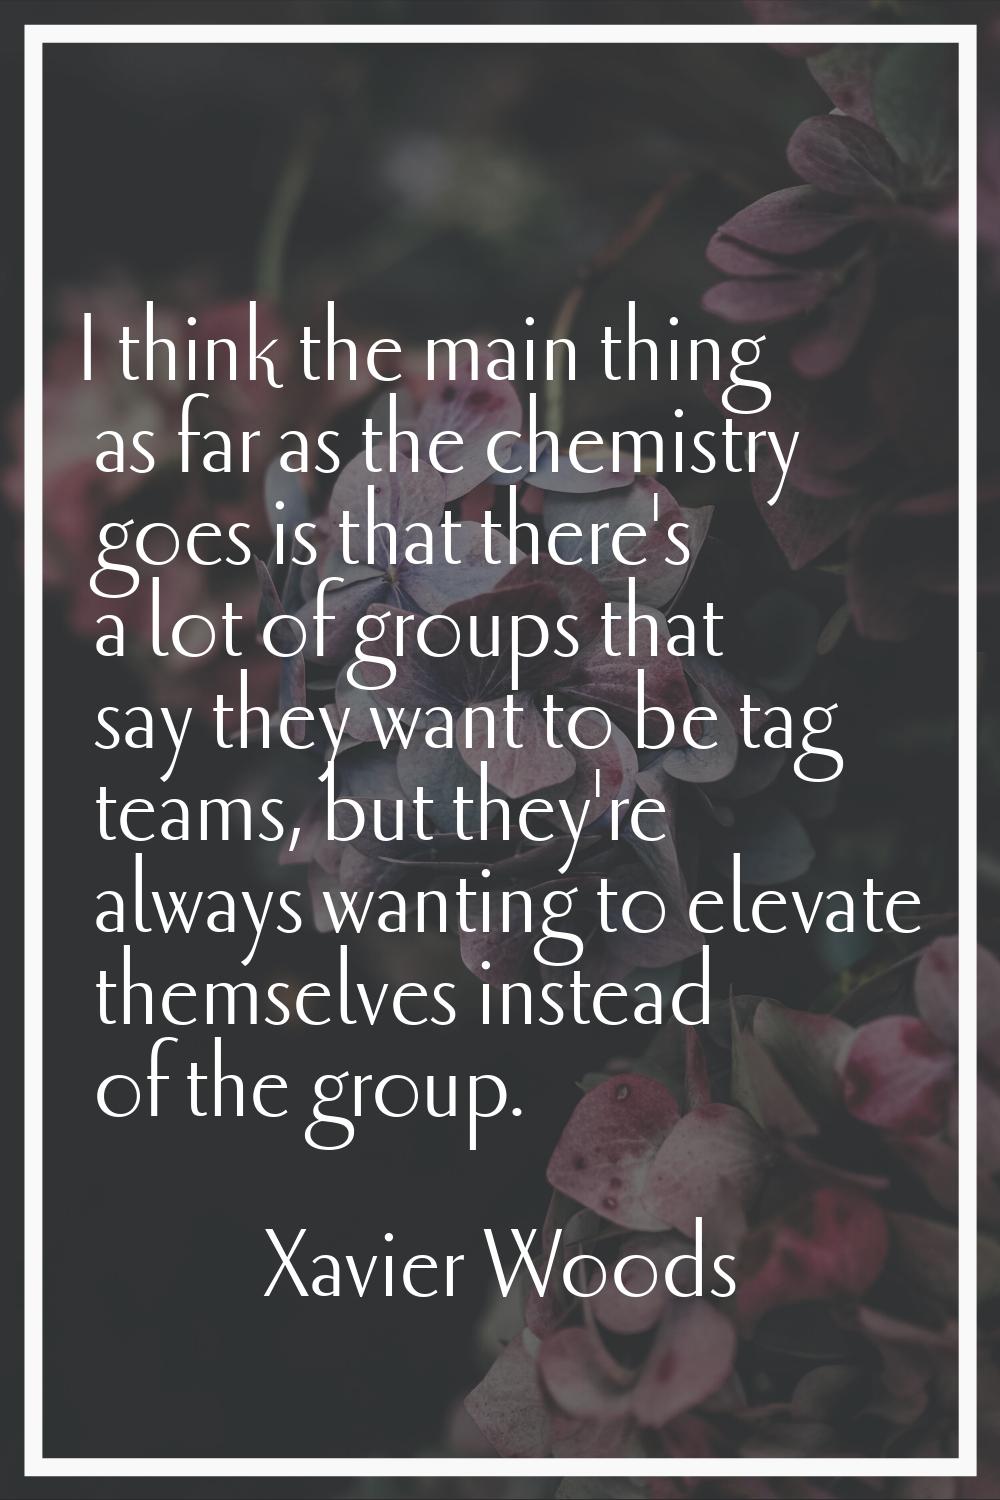 I think the main thing as far as the chemistry goes is that there's a lot of groups that say they w